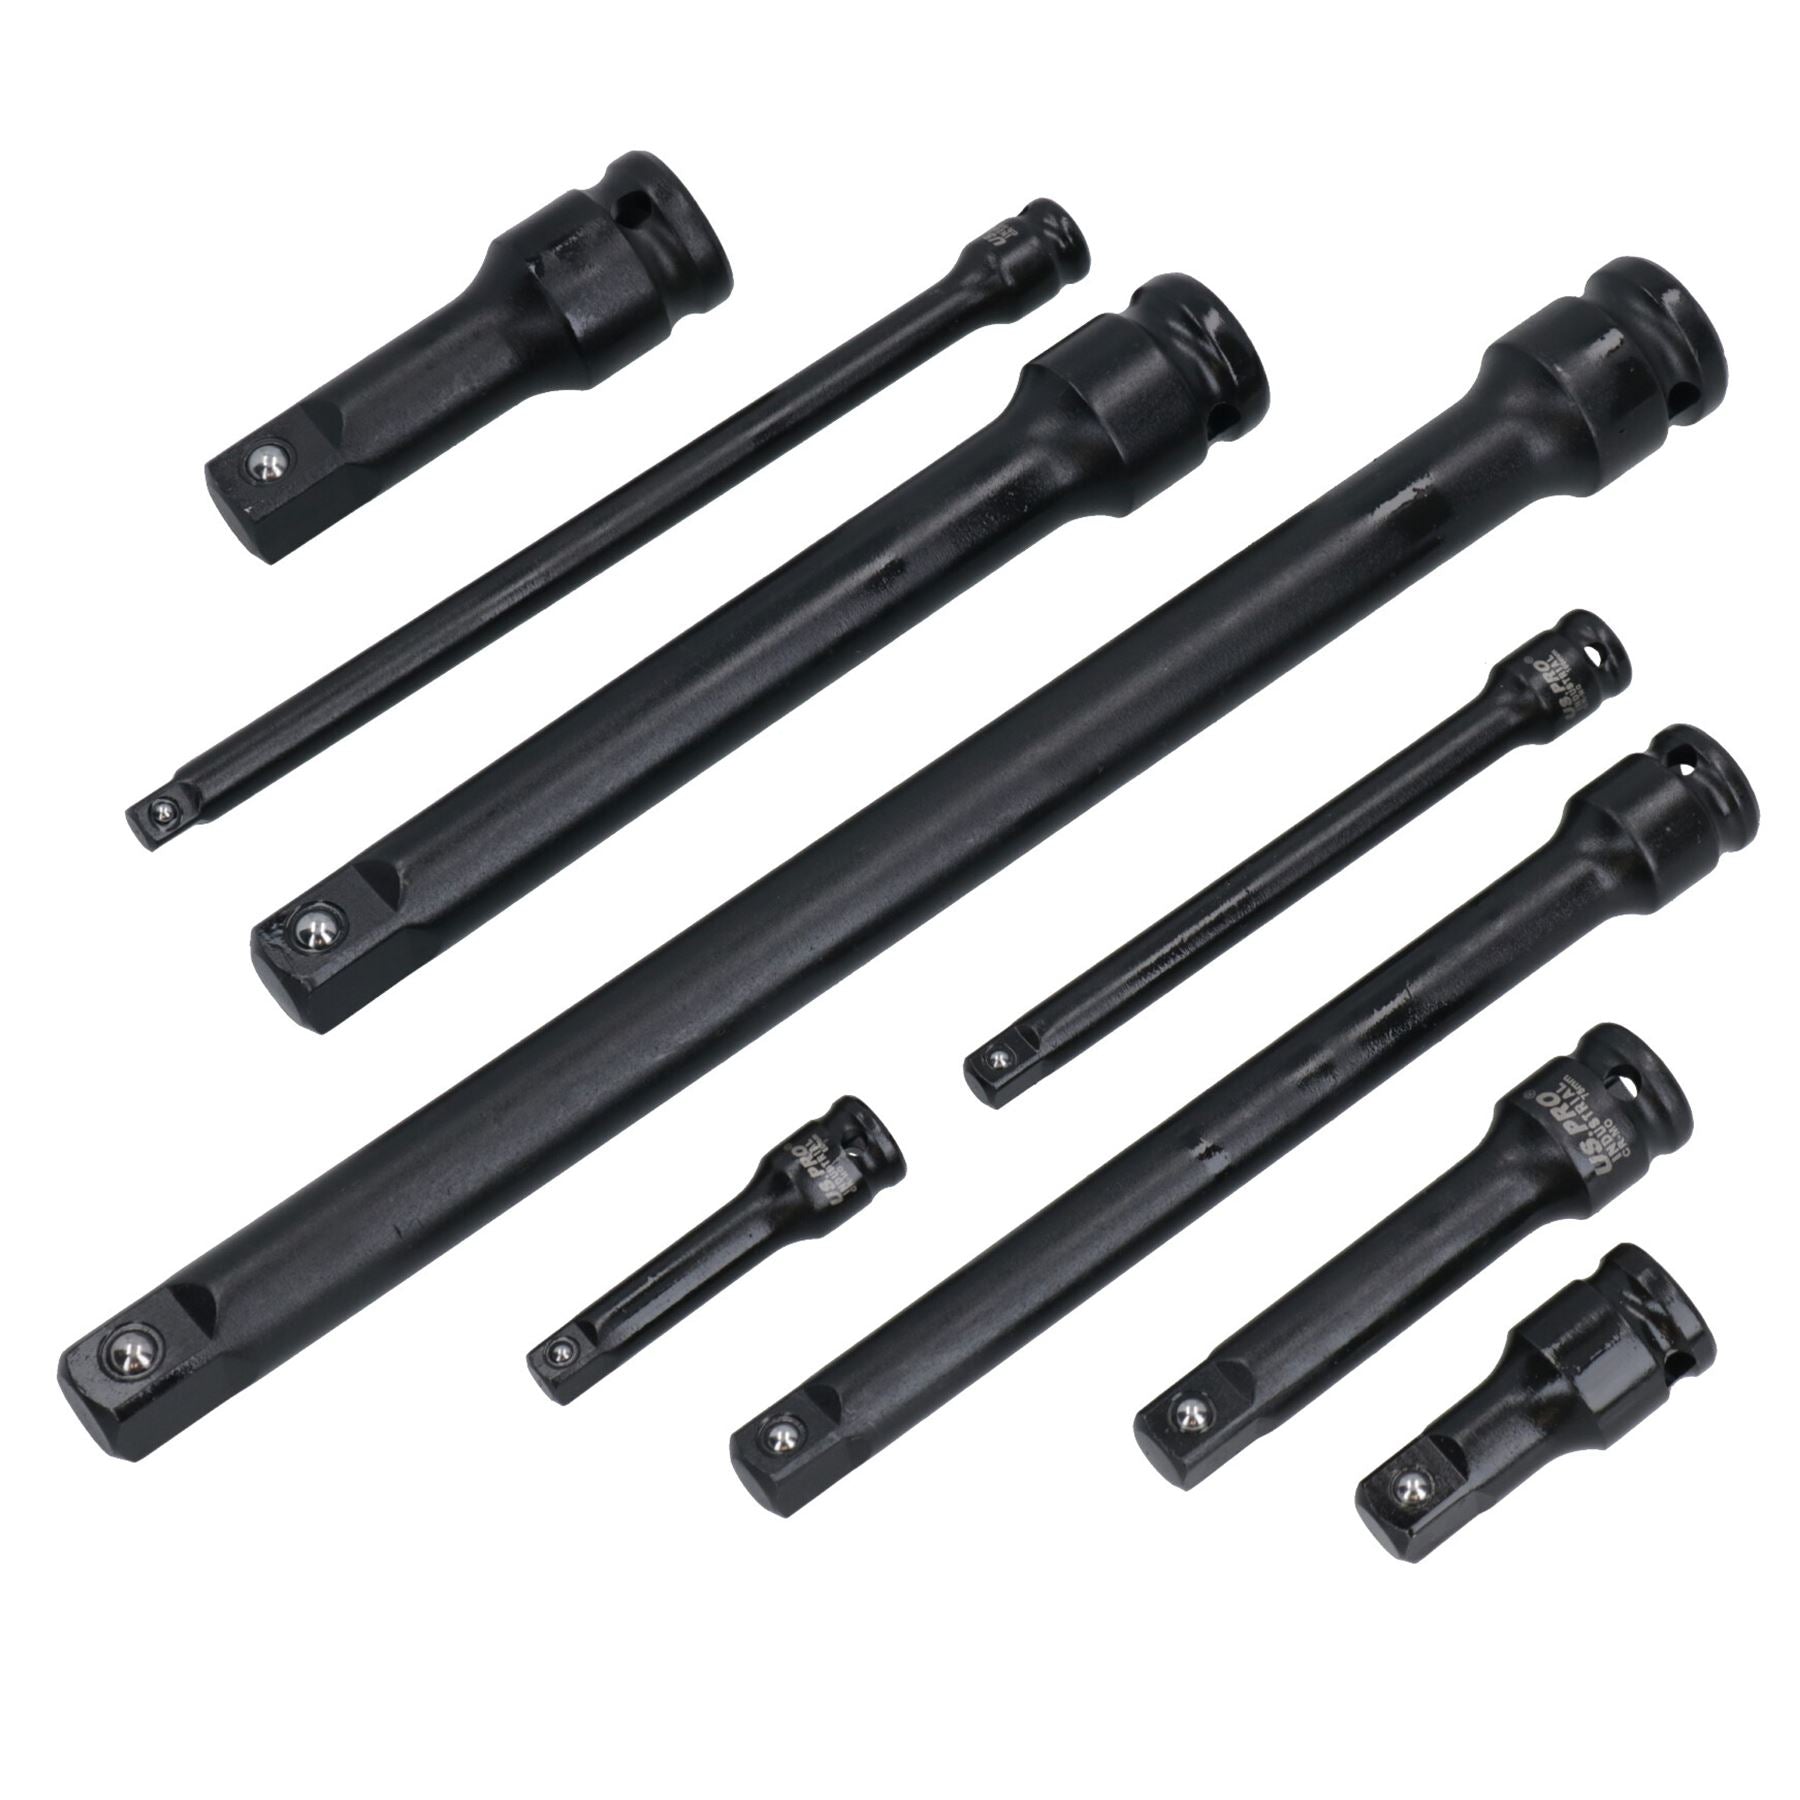 Mixed Drive Impacted Impact Socket Extension bar Set 1/4in 3/8in 1/2in Drive 9pc